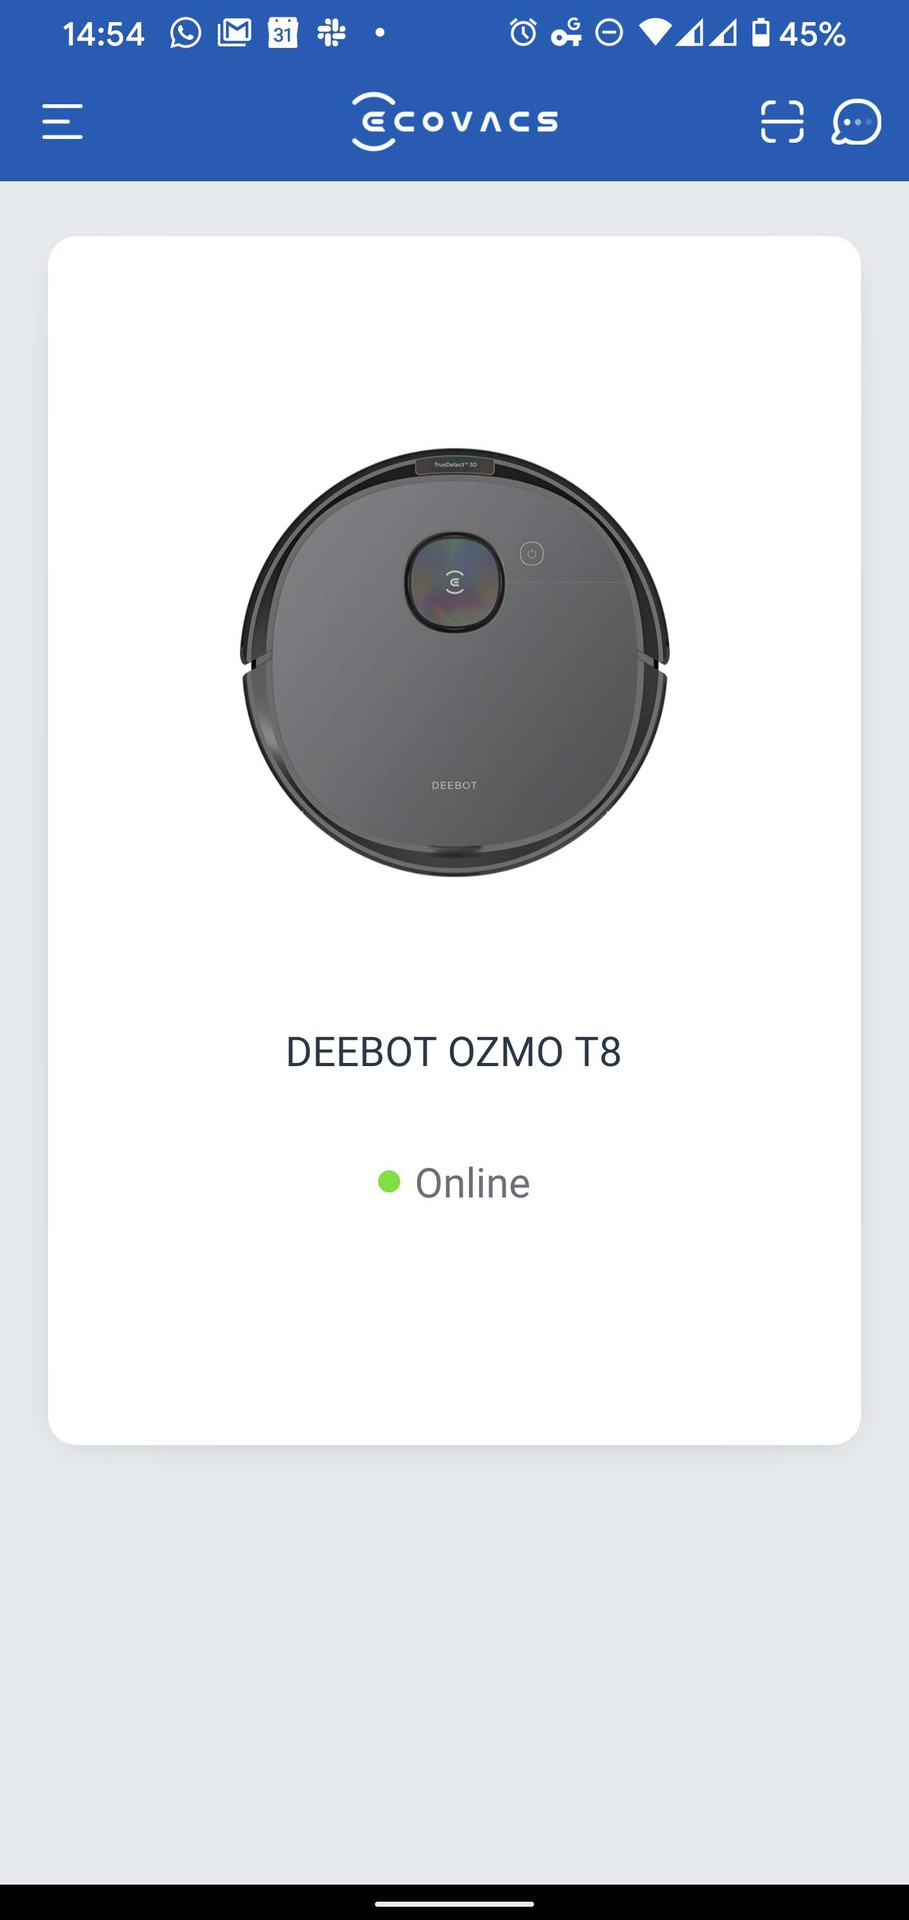 ECOVACS Home landing page with Deebot Ozmo T8